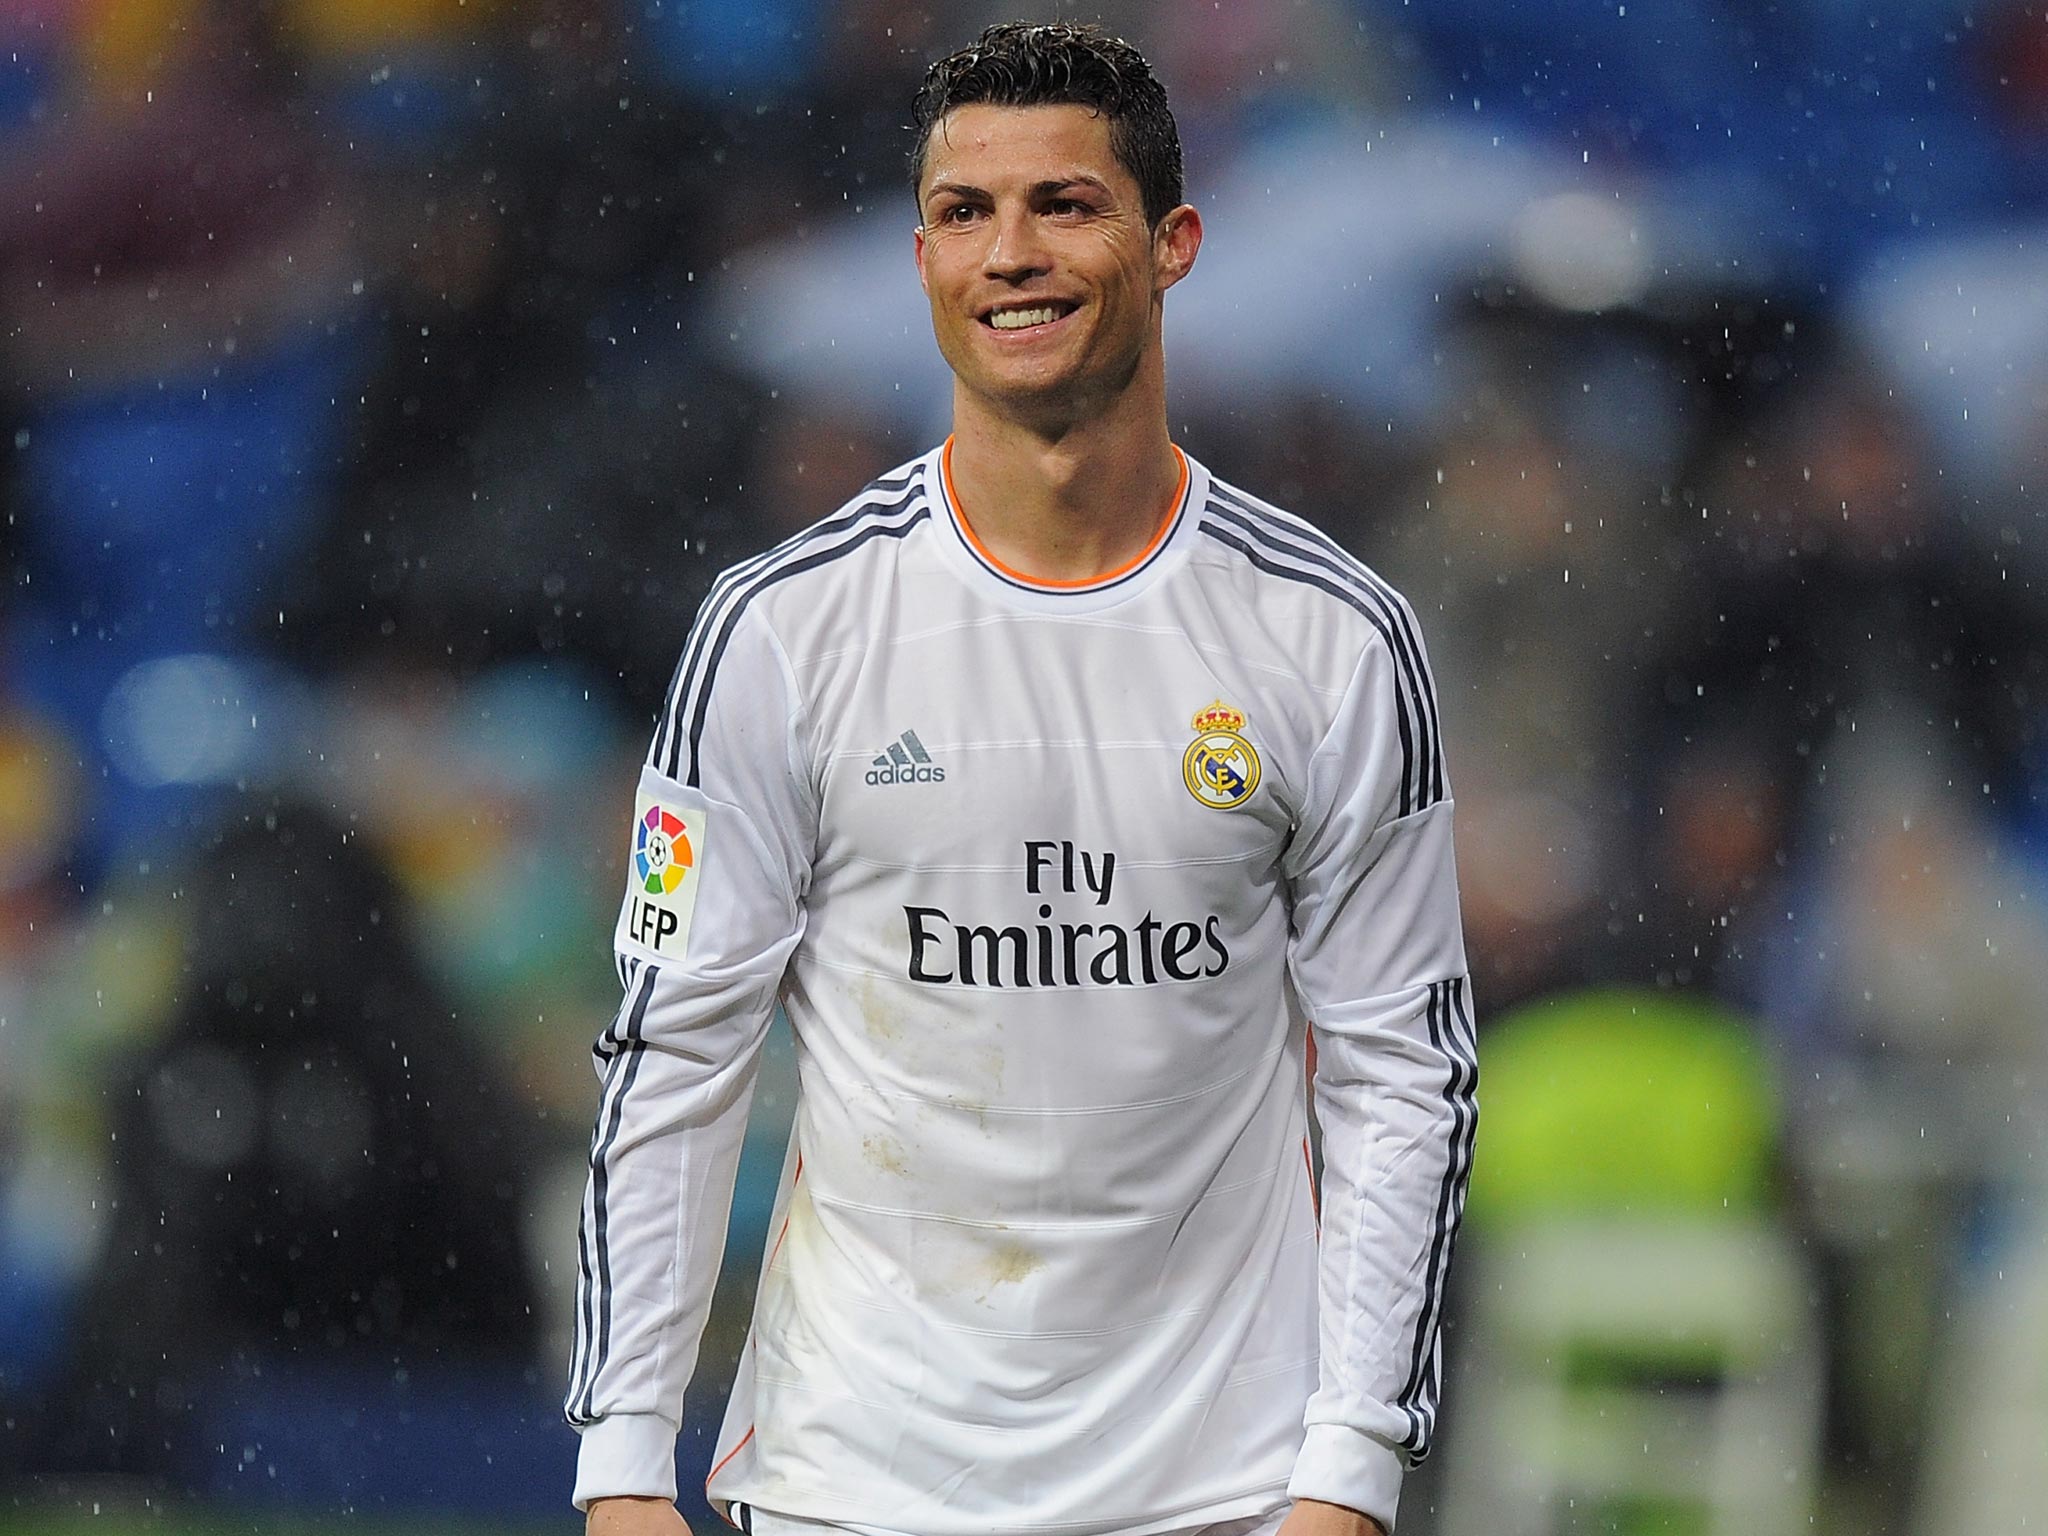 Real Madrid fans boo Cristiano Ronaldo and Gareth Bale even though they